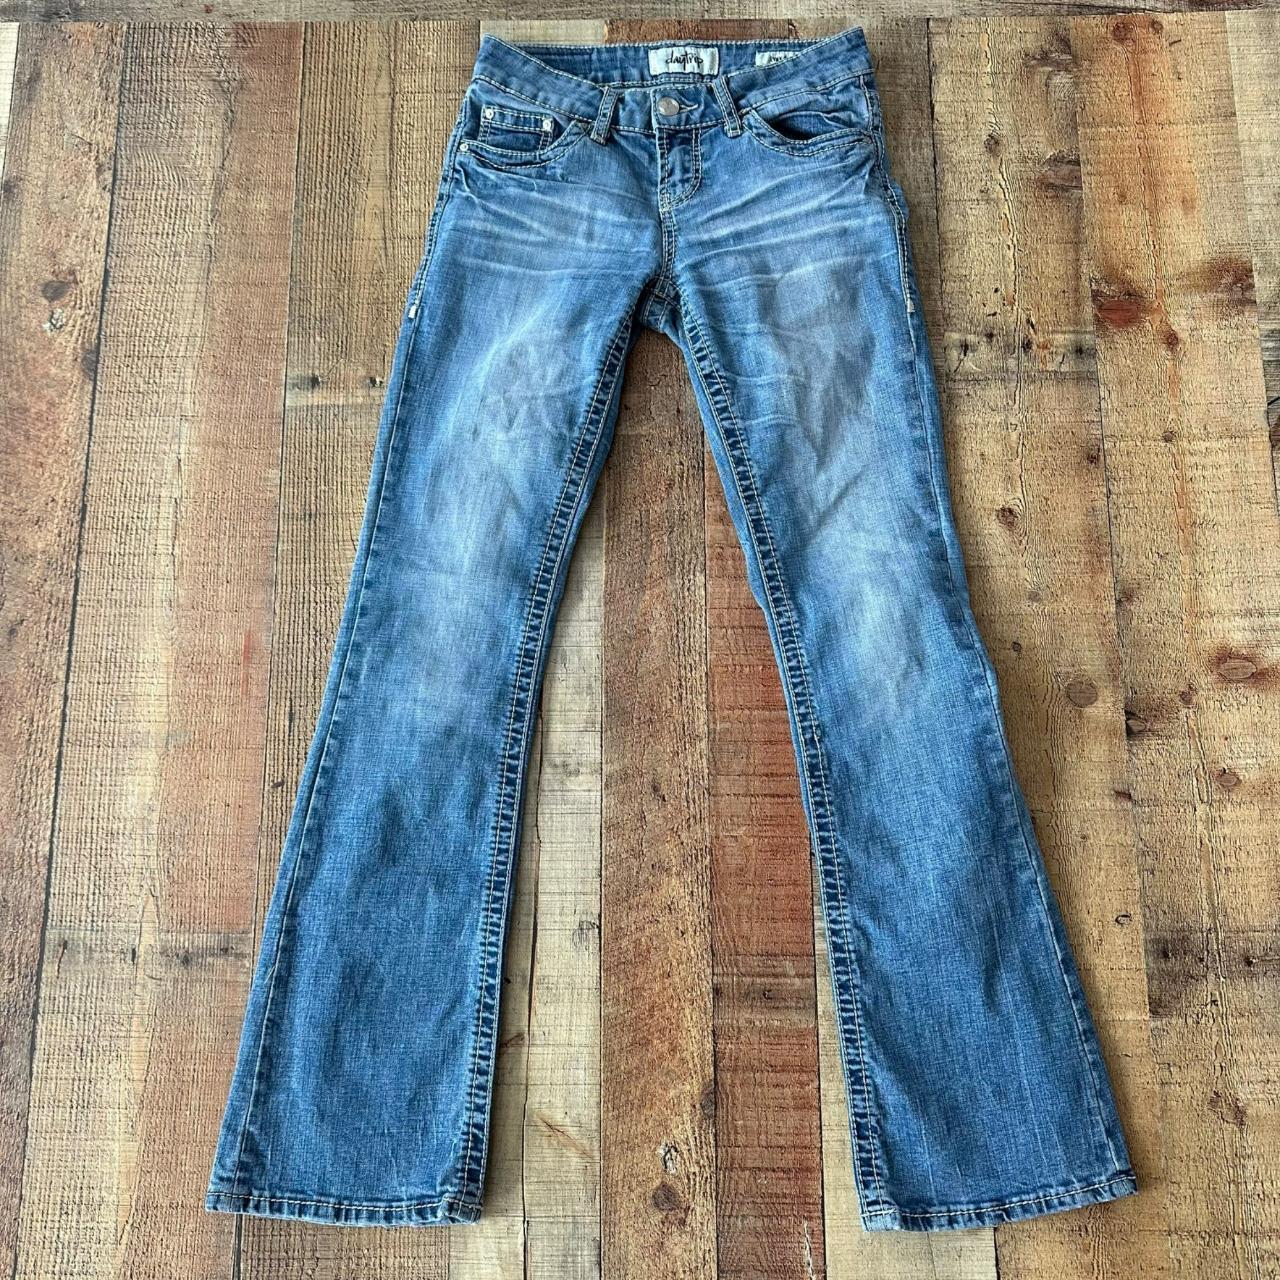 Daytrip womens lynx bootcut jeans -25 There are a... - Depop